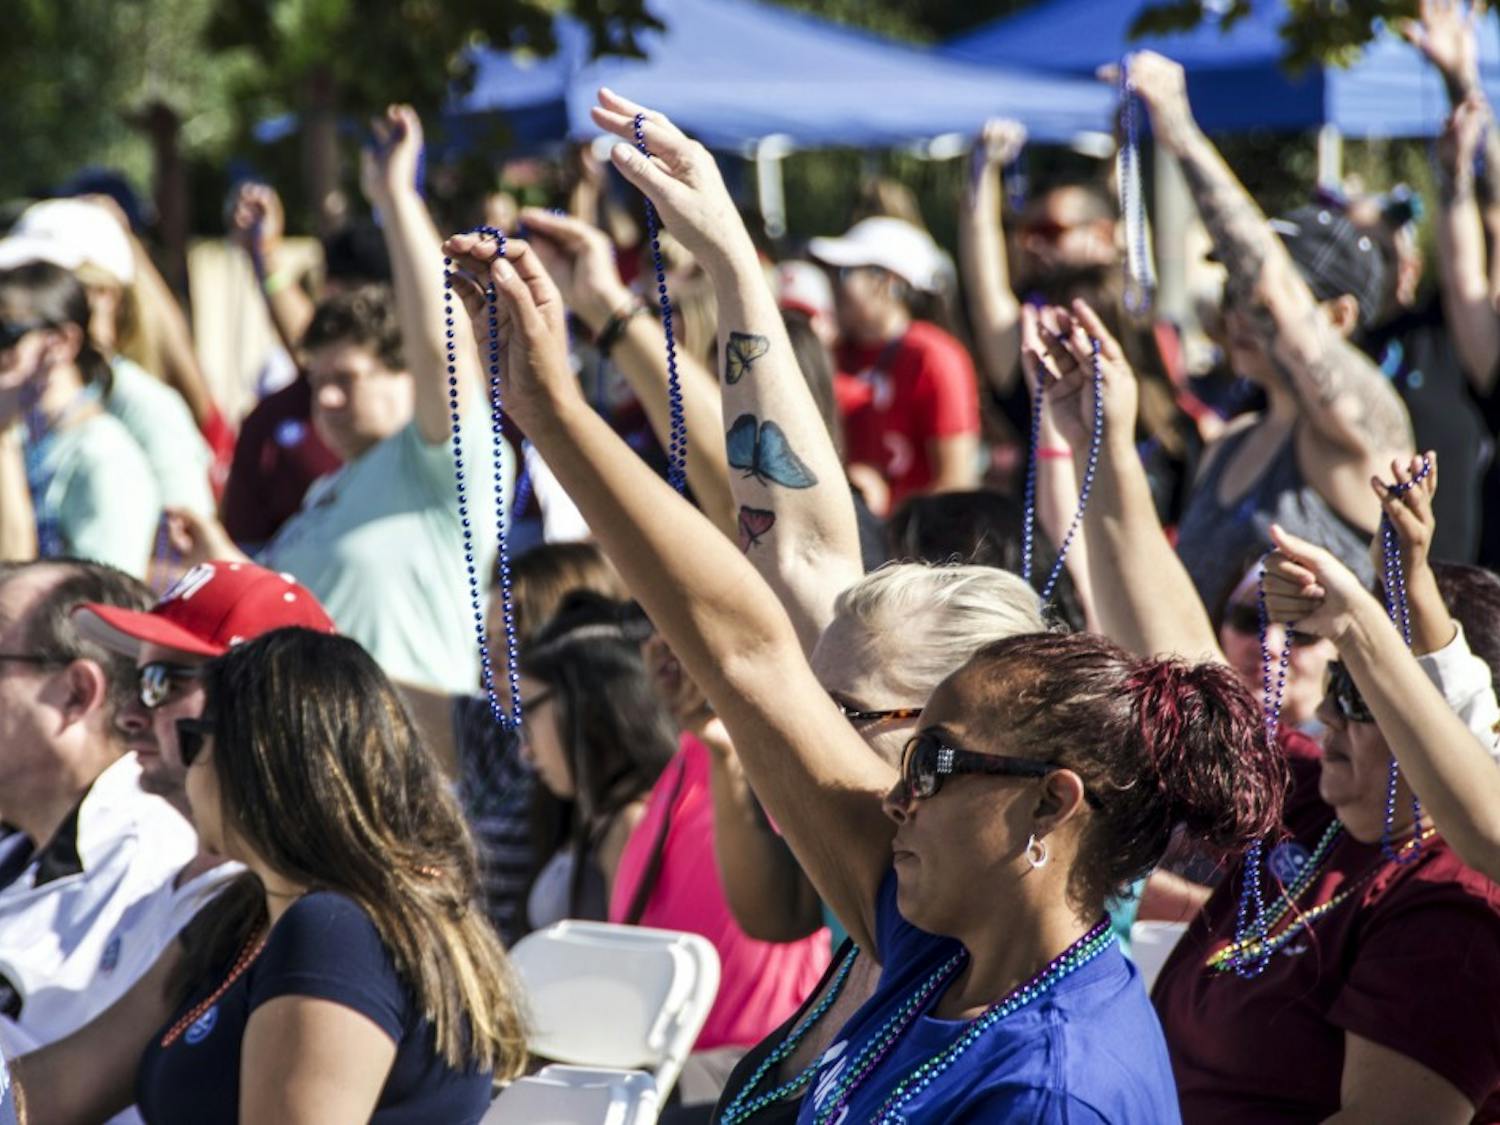 Albuquerque citizens participate in a fundraiser walk, helping 'American Foundation for Suicide Prevention' increase awareness and research September 29, 2018 at Hoffmantown Church.